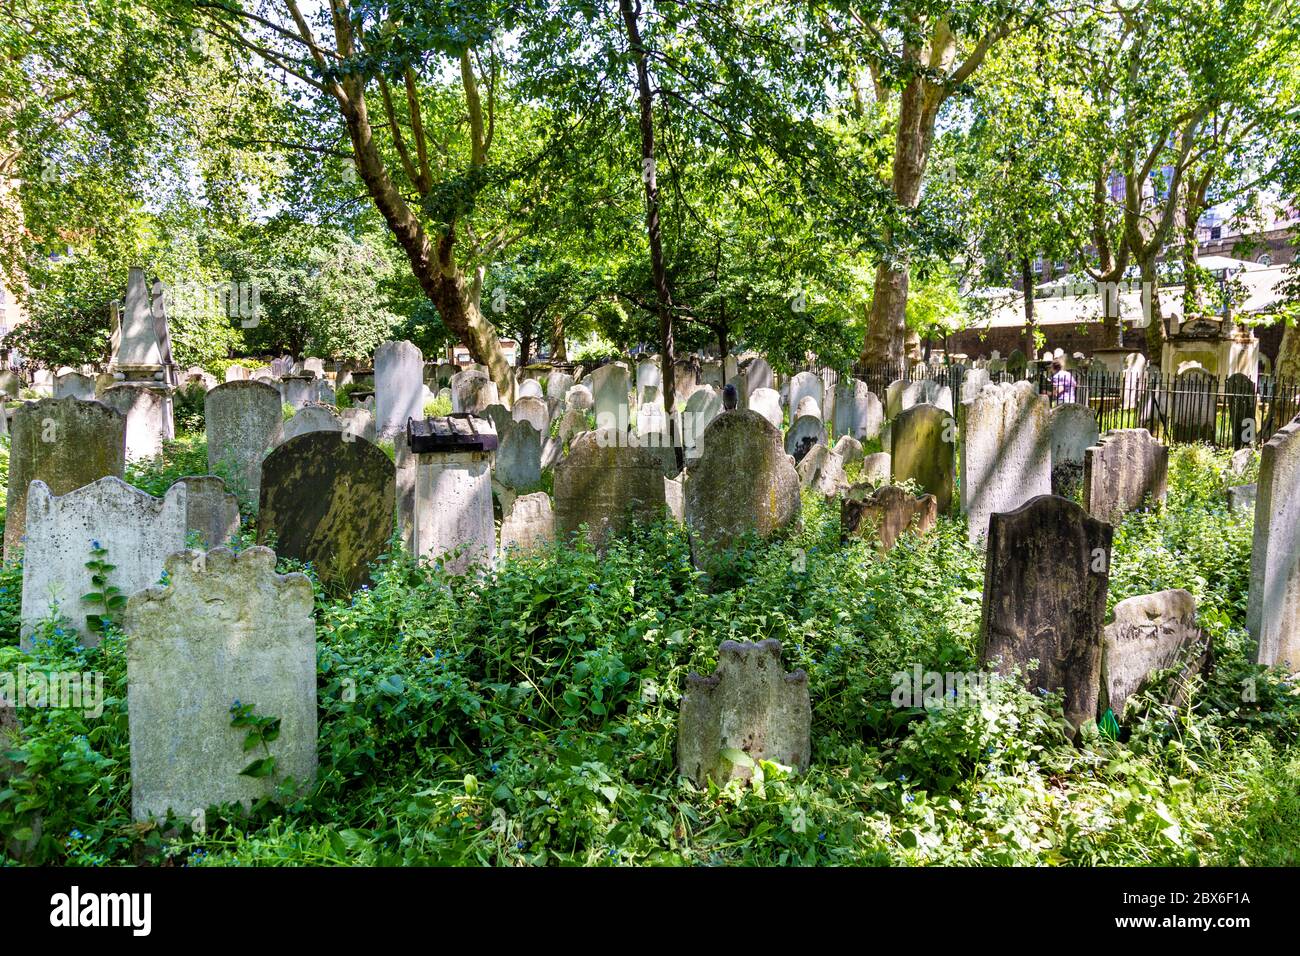 Old overgrown headstones at the Victorian Bunhill Fields Burial Ground, Old Street, London, UK Stock Photo